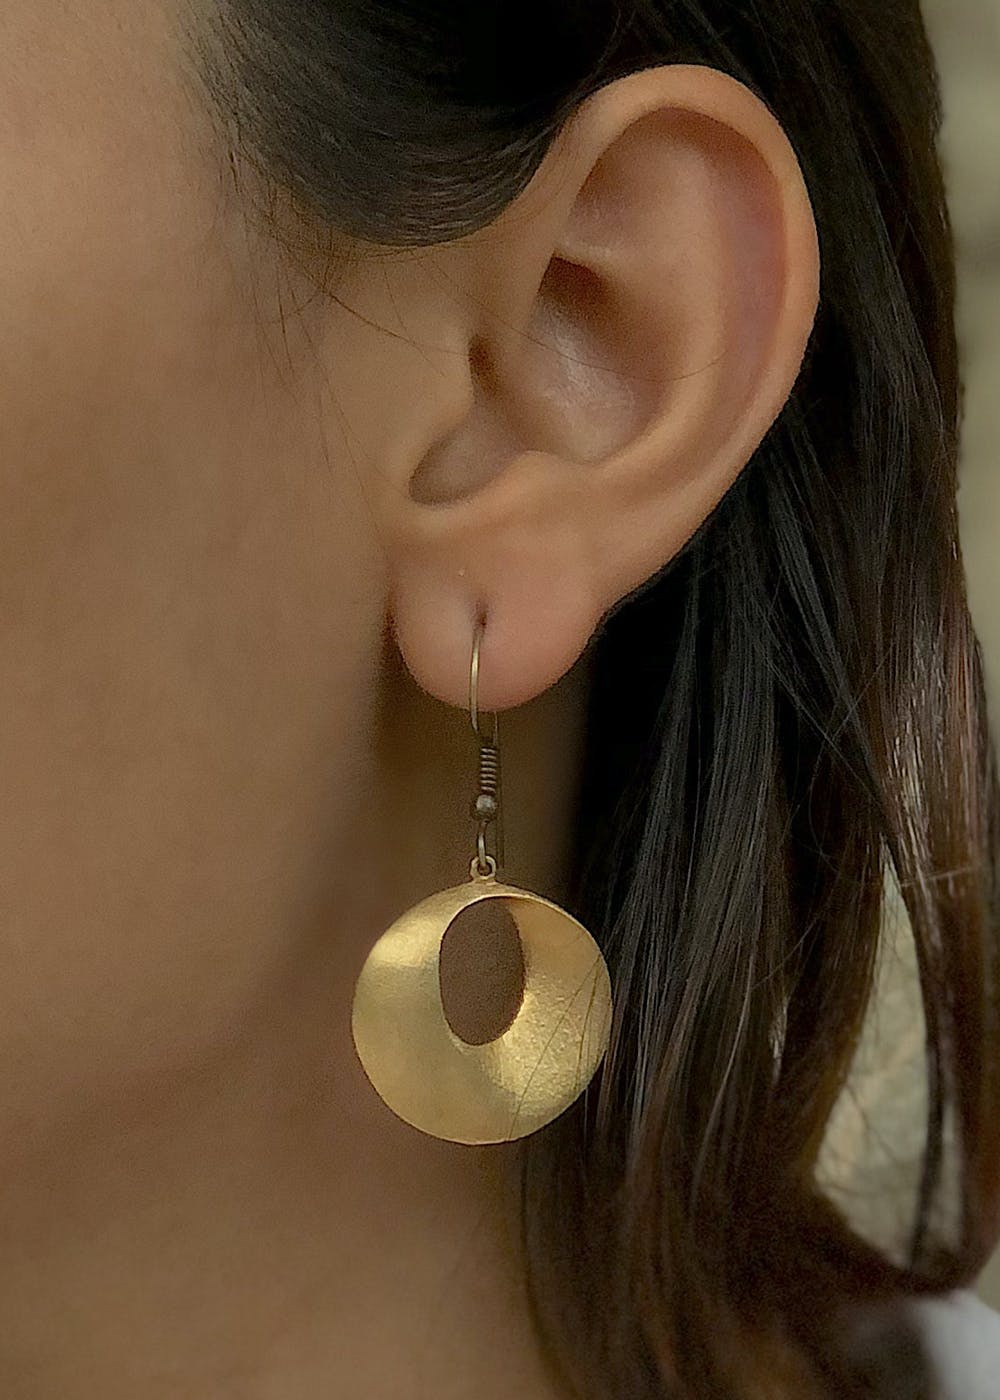 Buy Stylish Round Hanging Earrings with Golden Base for Women and Girls   Available in 6 Fashionable Colors  Perfect for Casual and Formal Occasions  Velvet Black at Amazonin